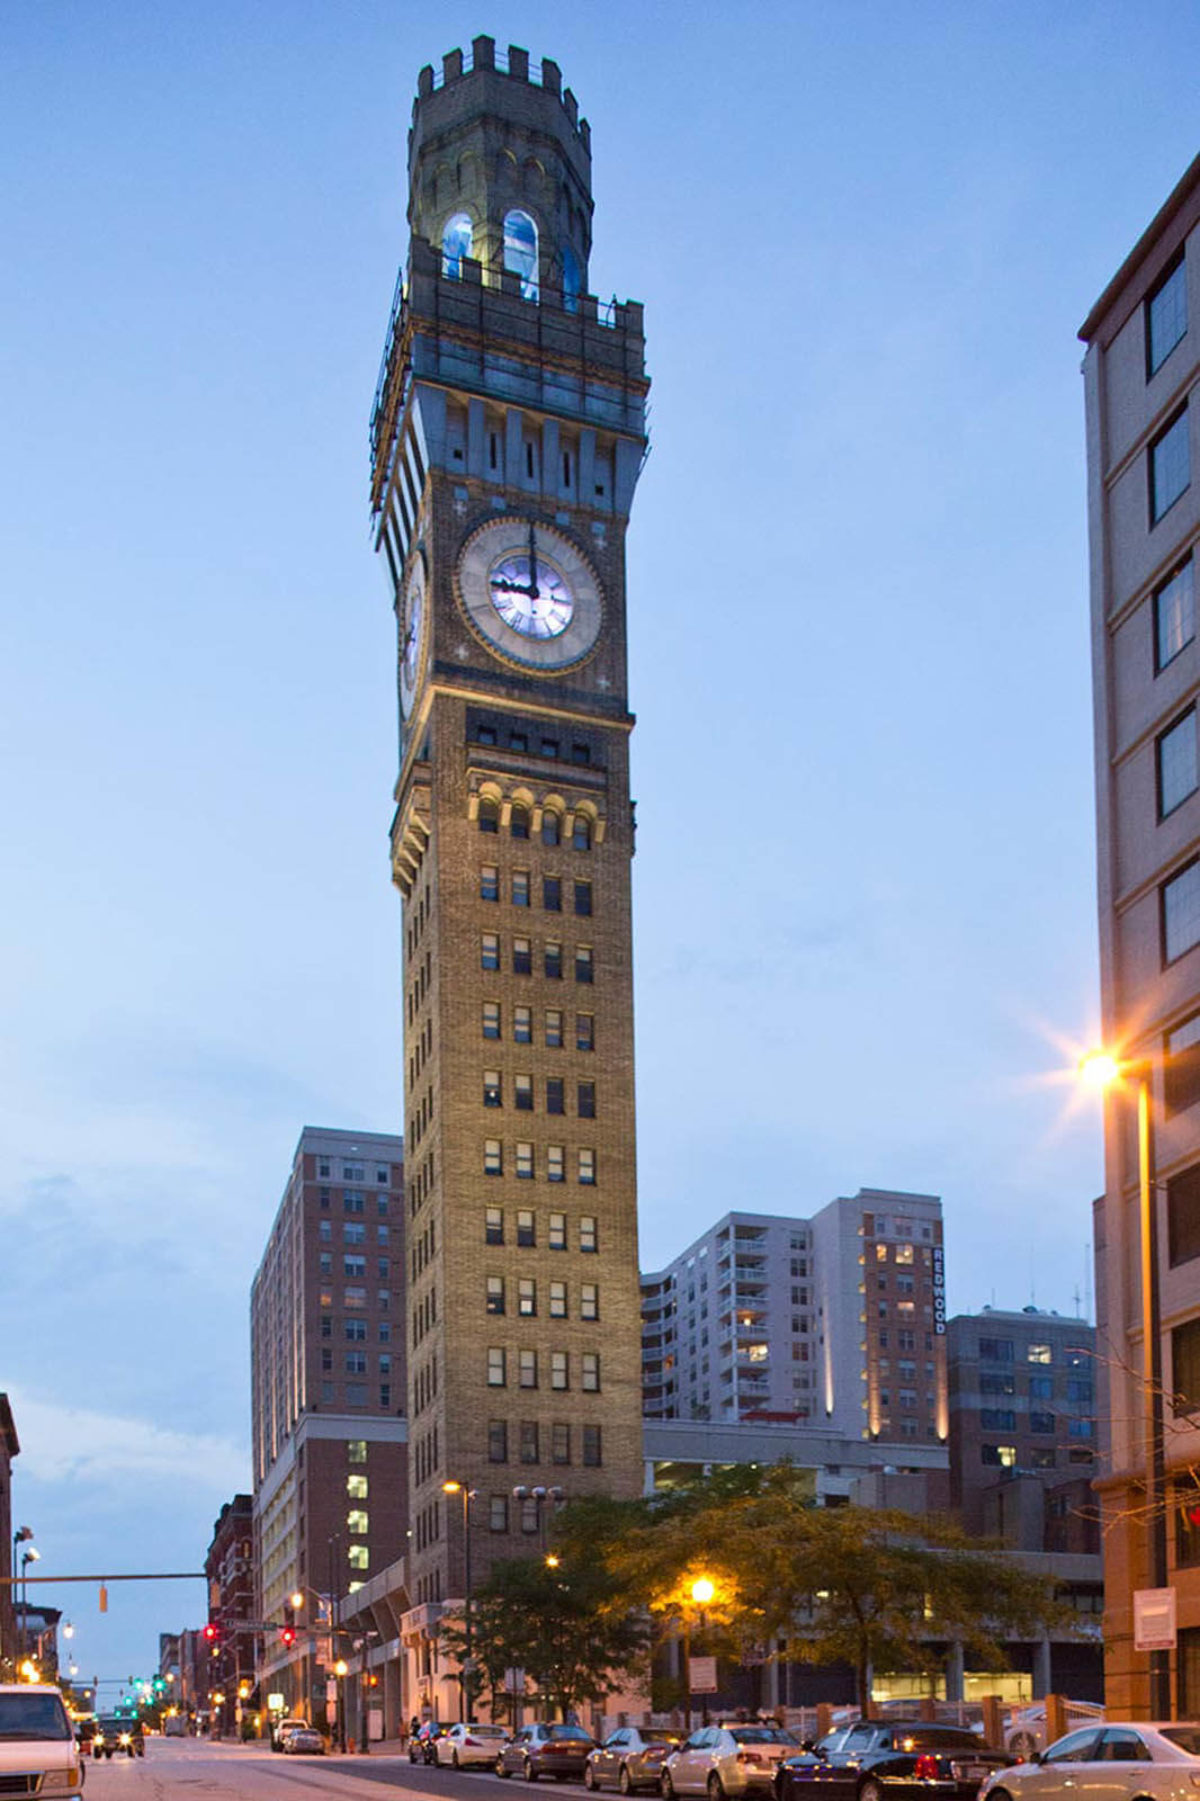 Outside view of The Bromo Tower at night in Baltimore, Maryland.